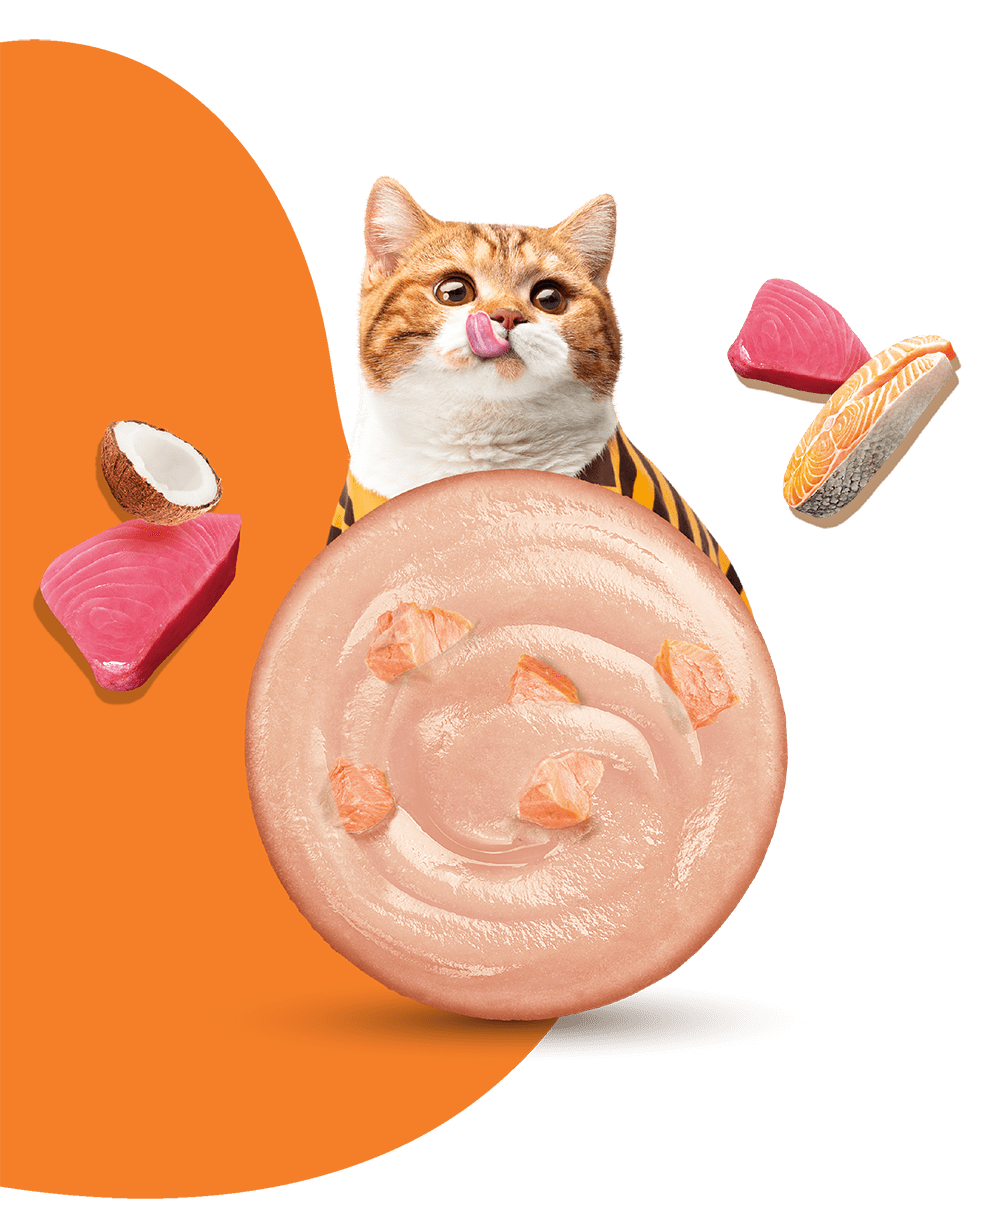 Moochie Cat Food Tuna Mousse with Salmon Pouch 70g